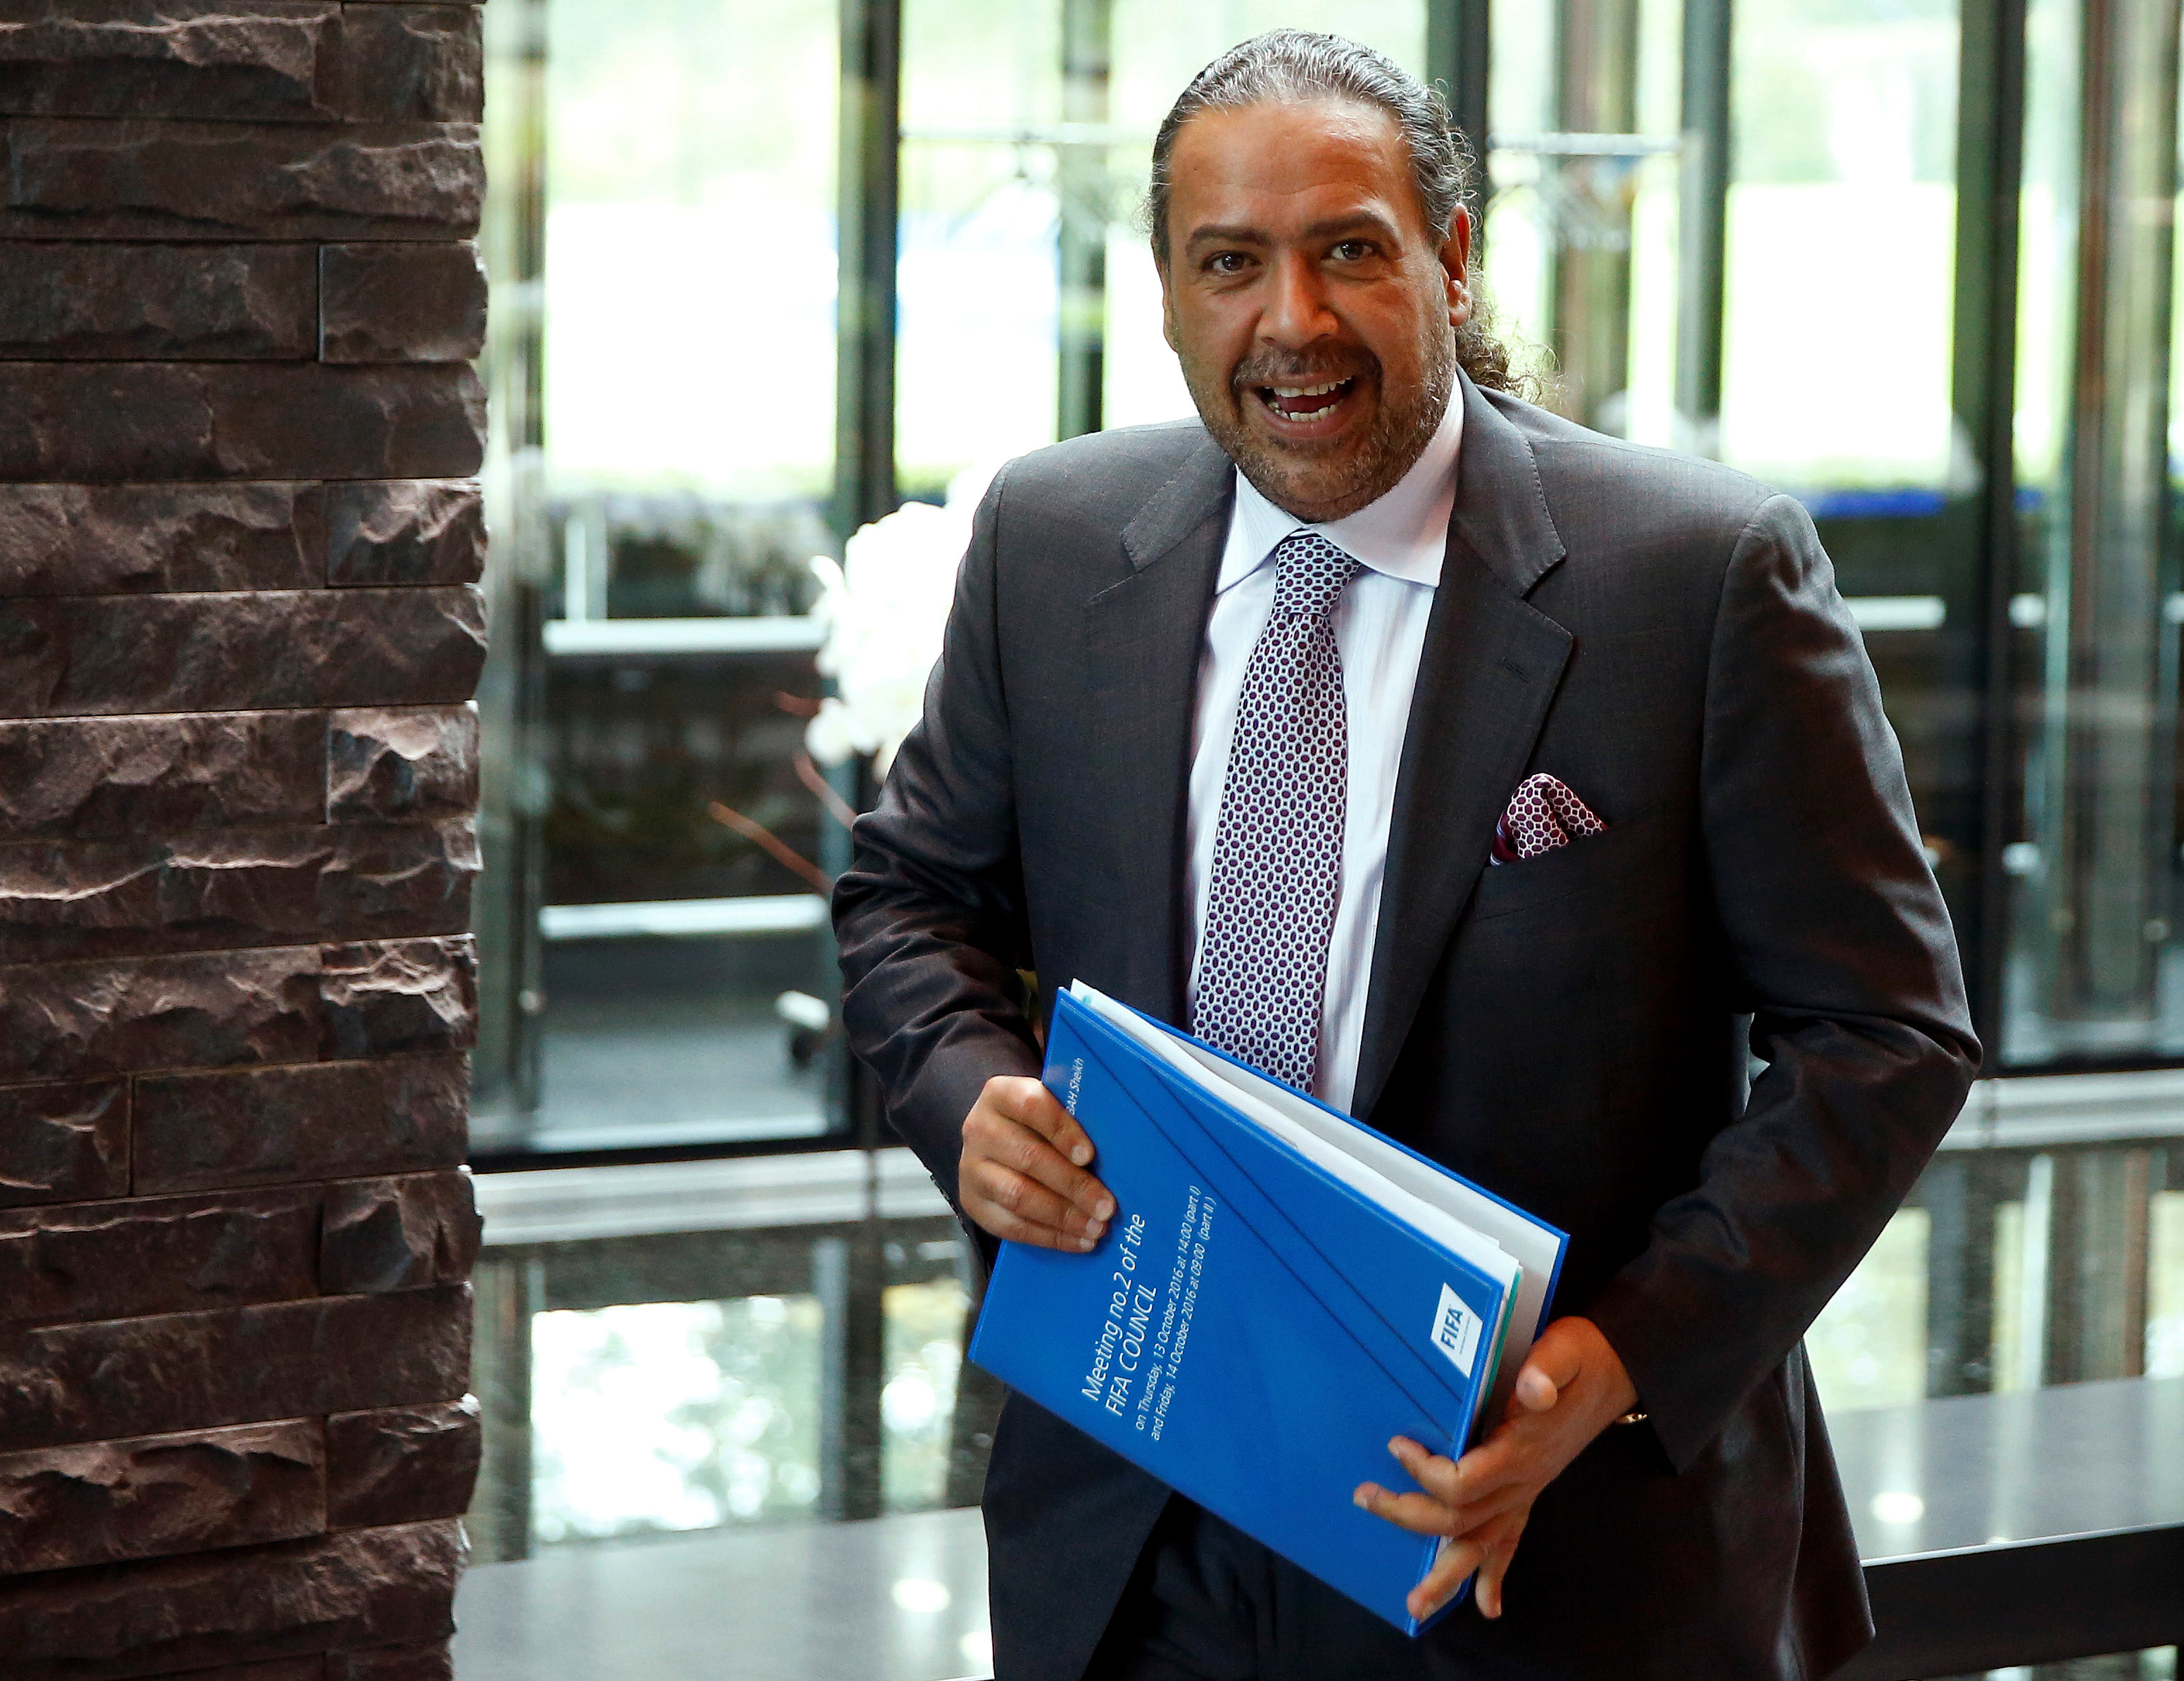 Kuwait's member of the FIFA executive committee Sheikh Ahmad al-Fahad al-Sabah leaves after a meeting of the FIFA Council at the FIFA headquarters in Zurich